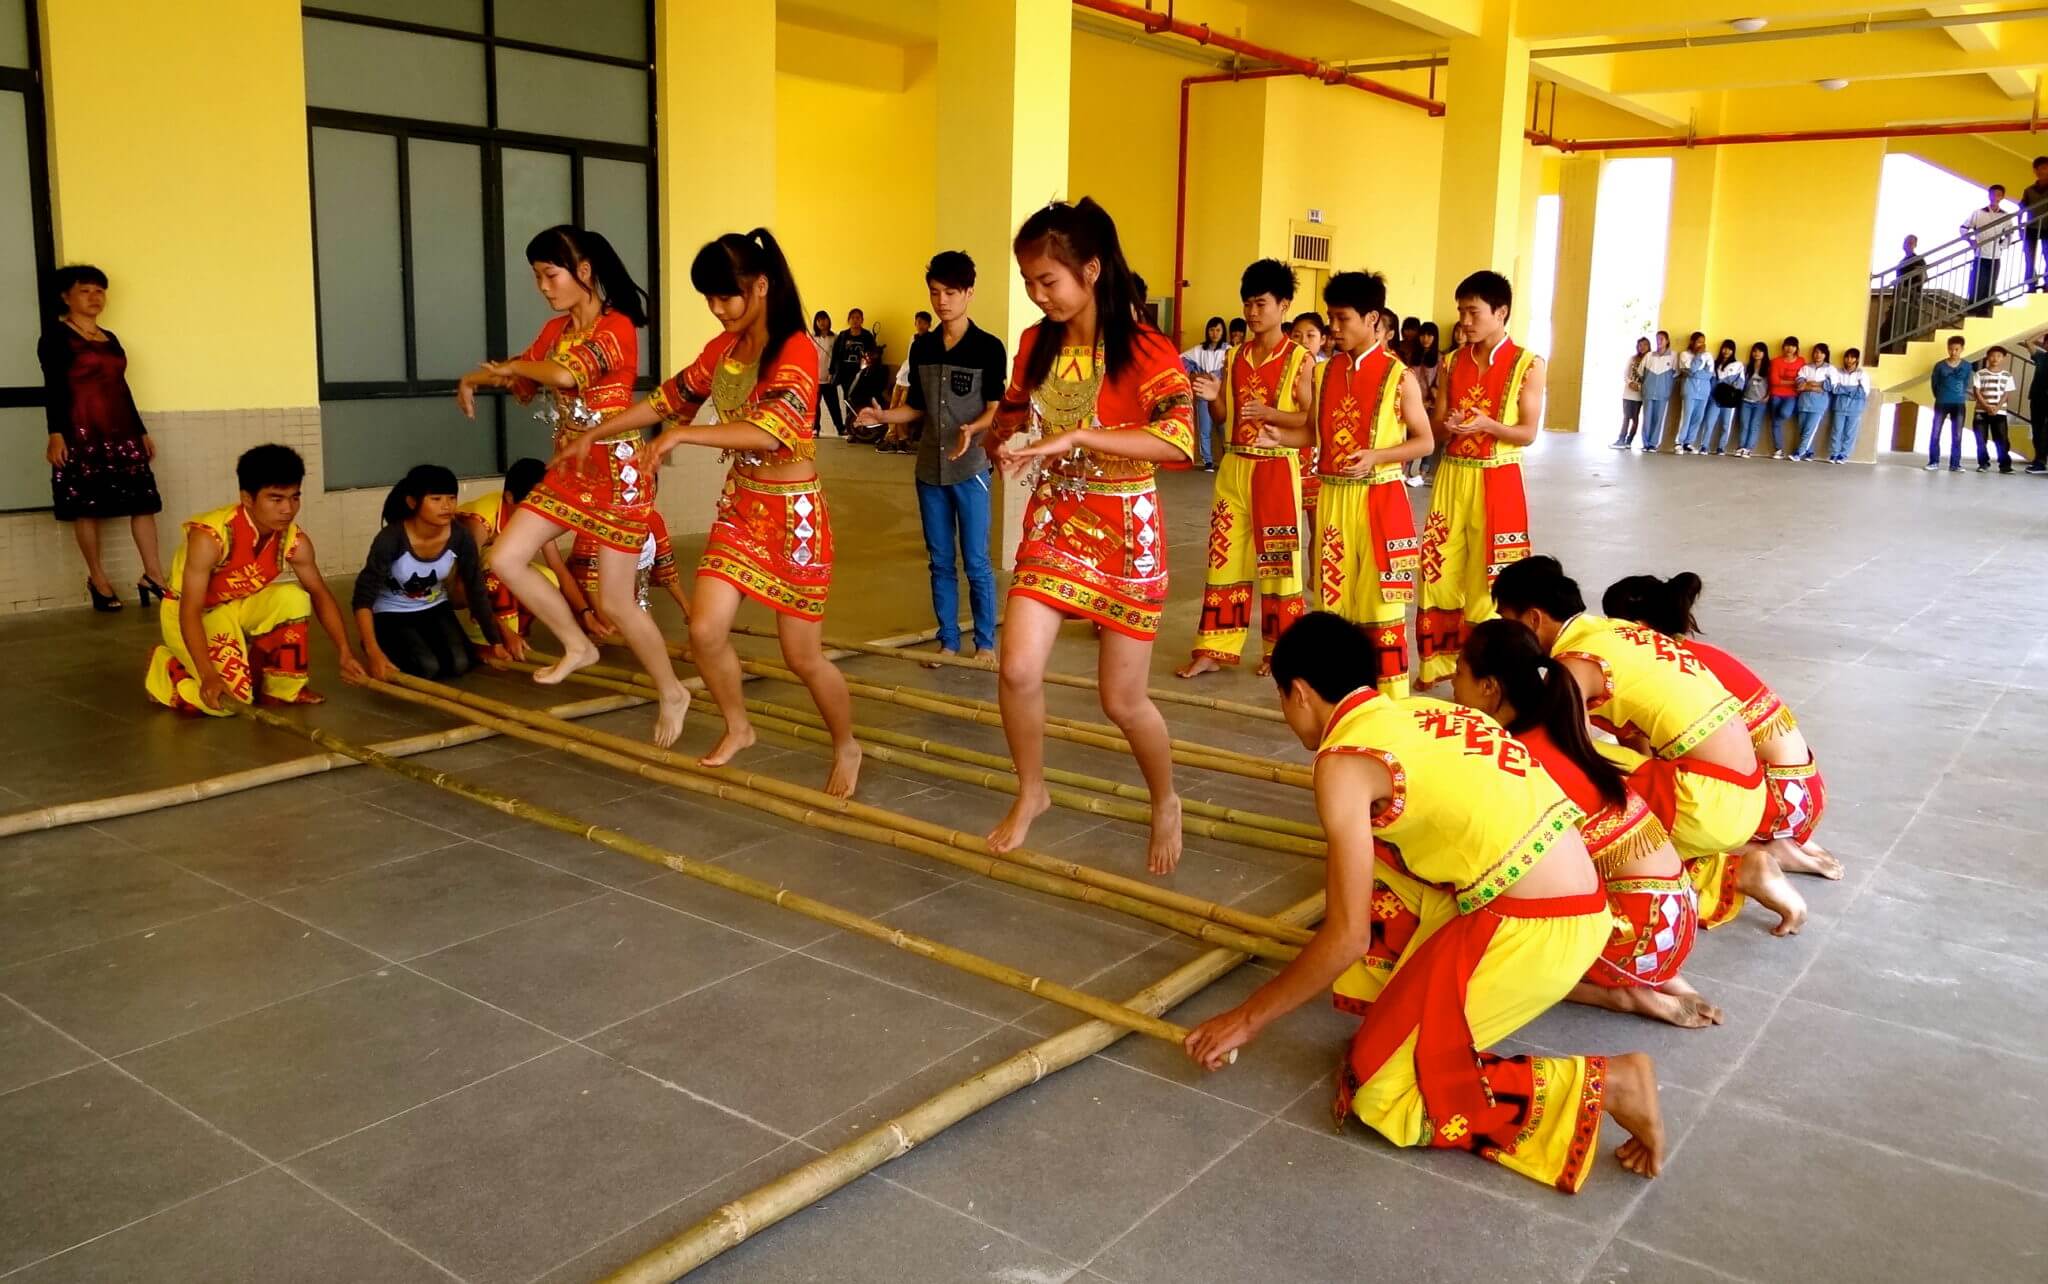 Bamboo Dance being performed - Bamboooz